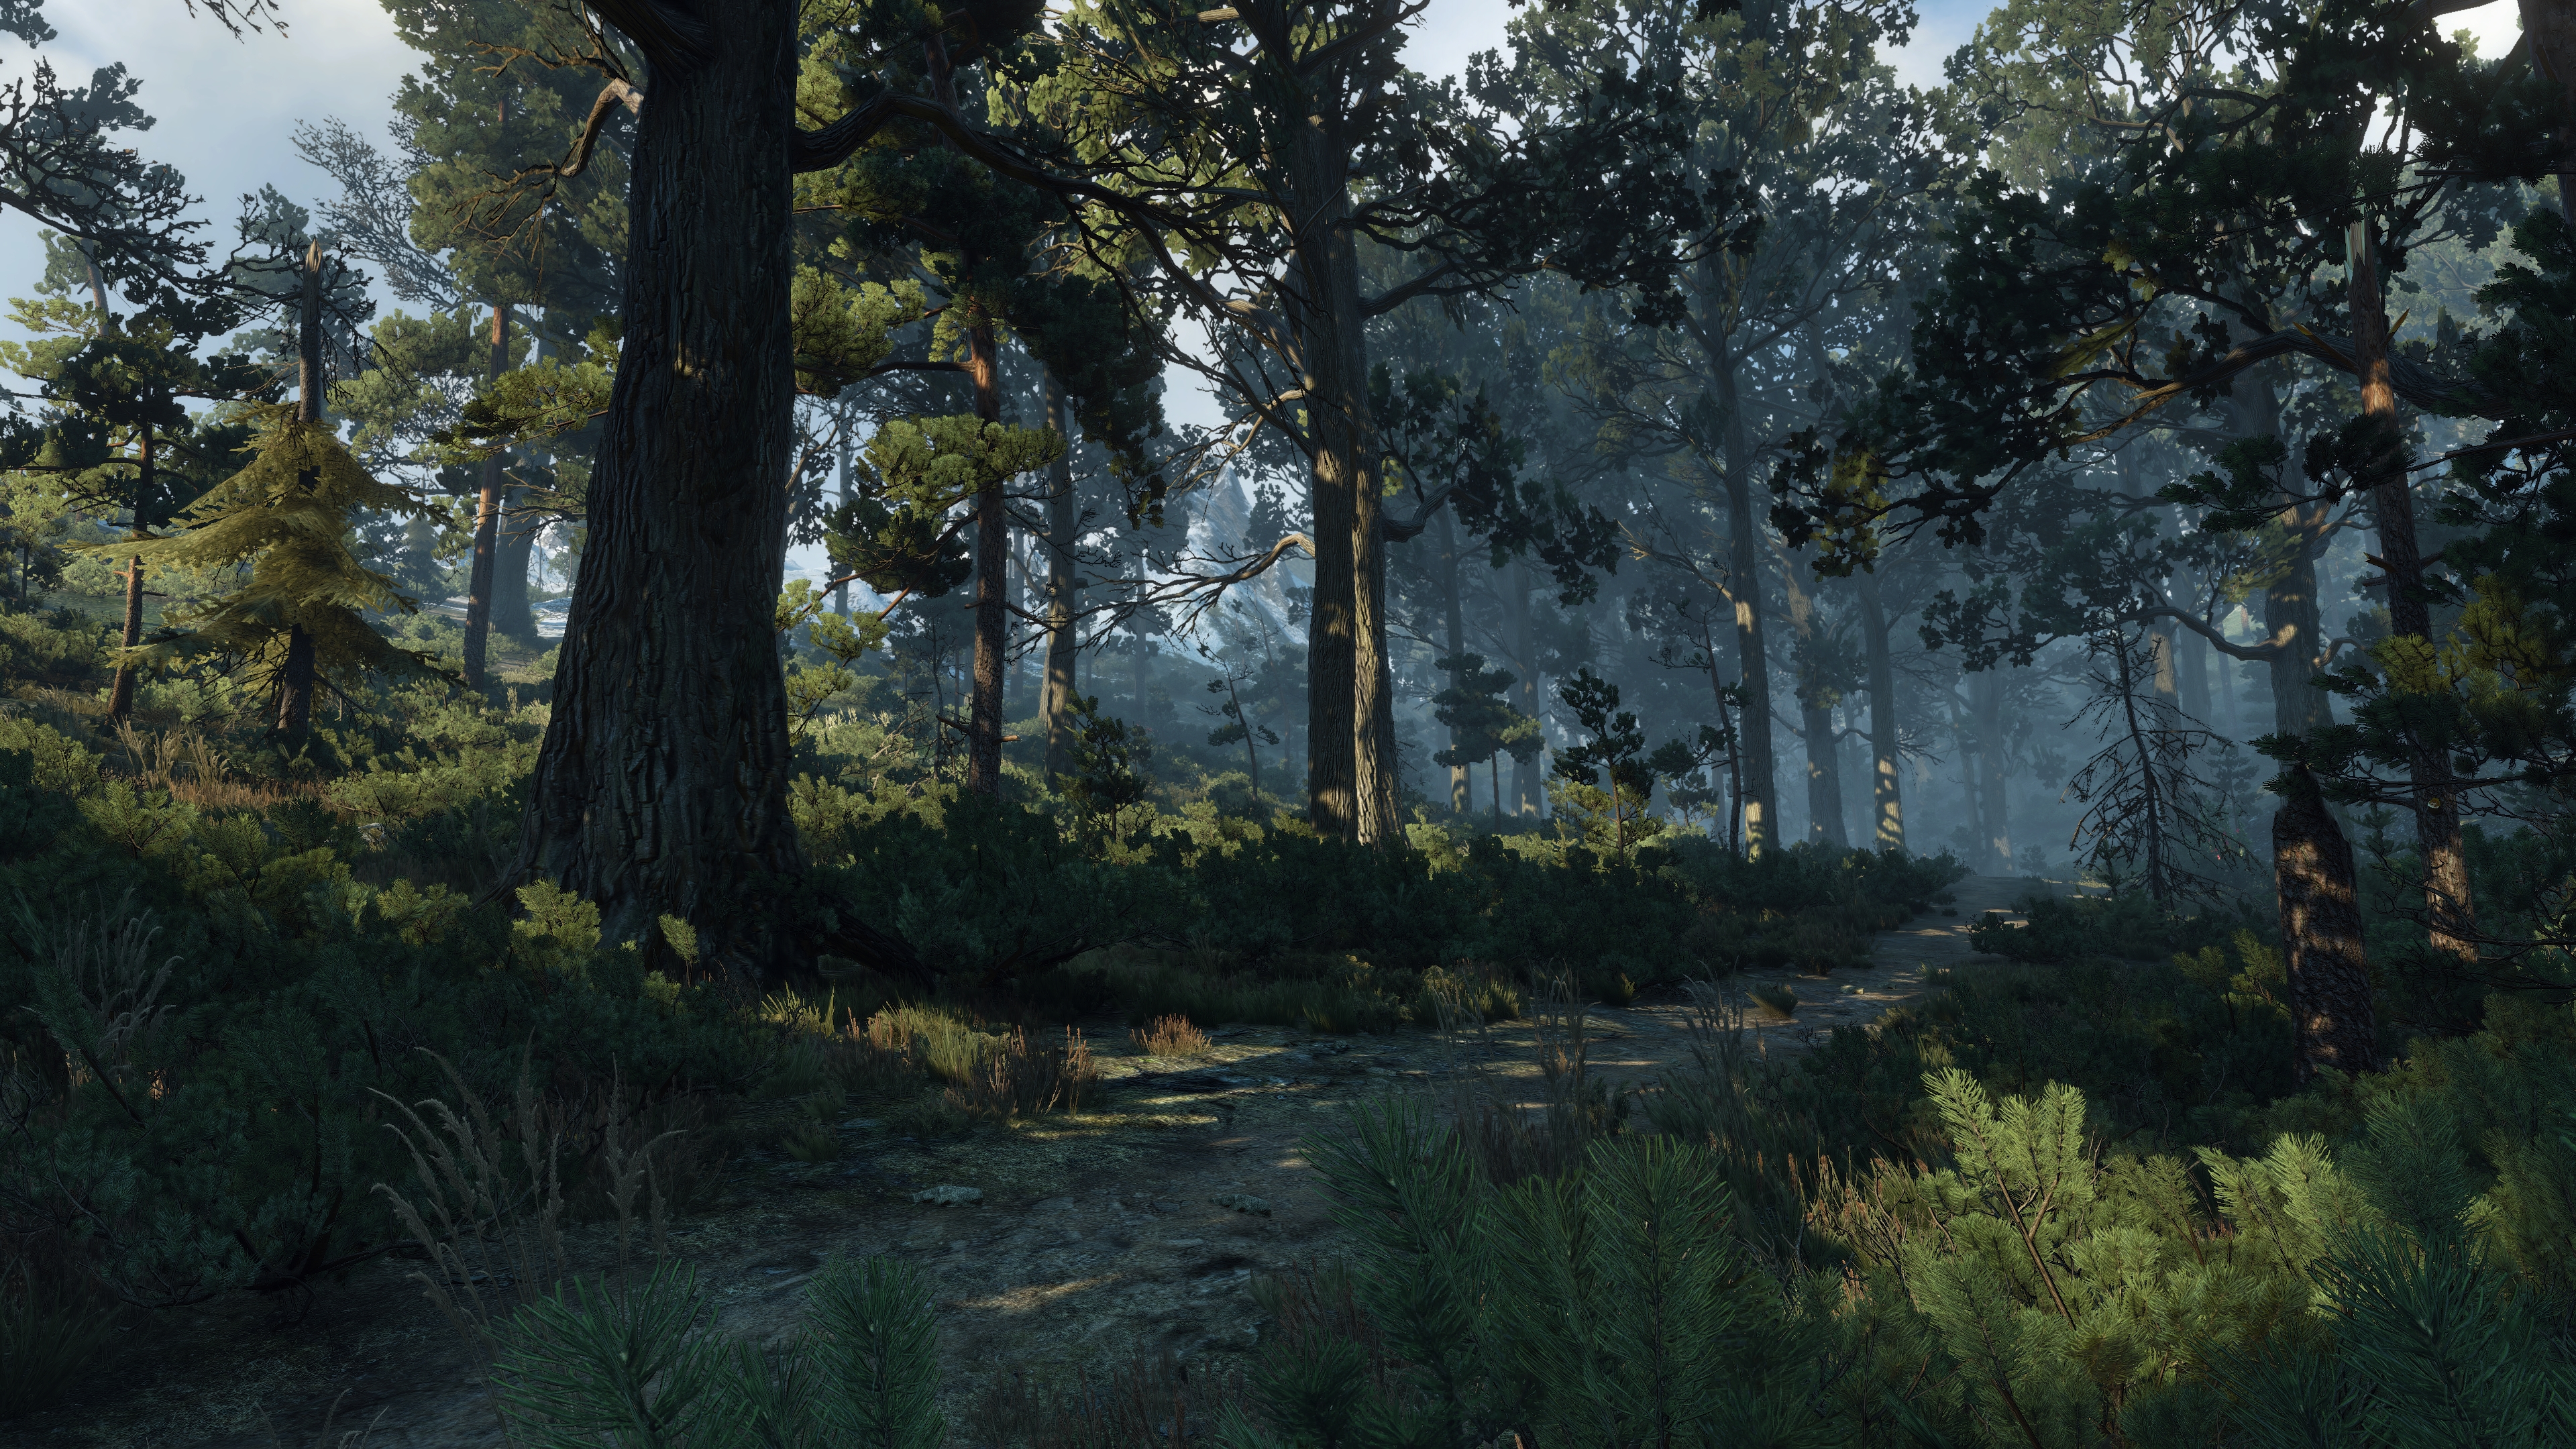 General 3840x2160 The Witcher 3: Wild Hunt screen shot PC gaming forest Skellige CGI video game art trees video games sunlight path nature plants branch outdoors